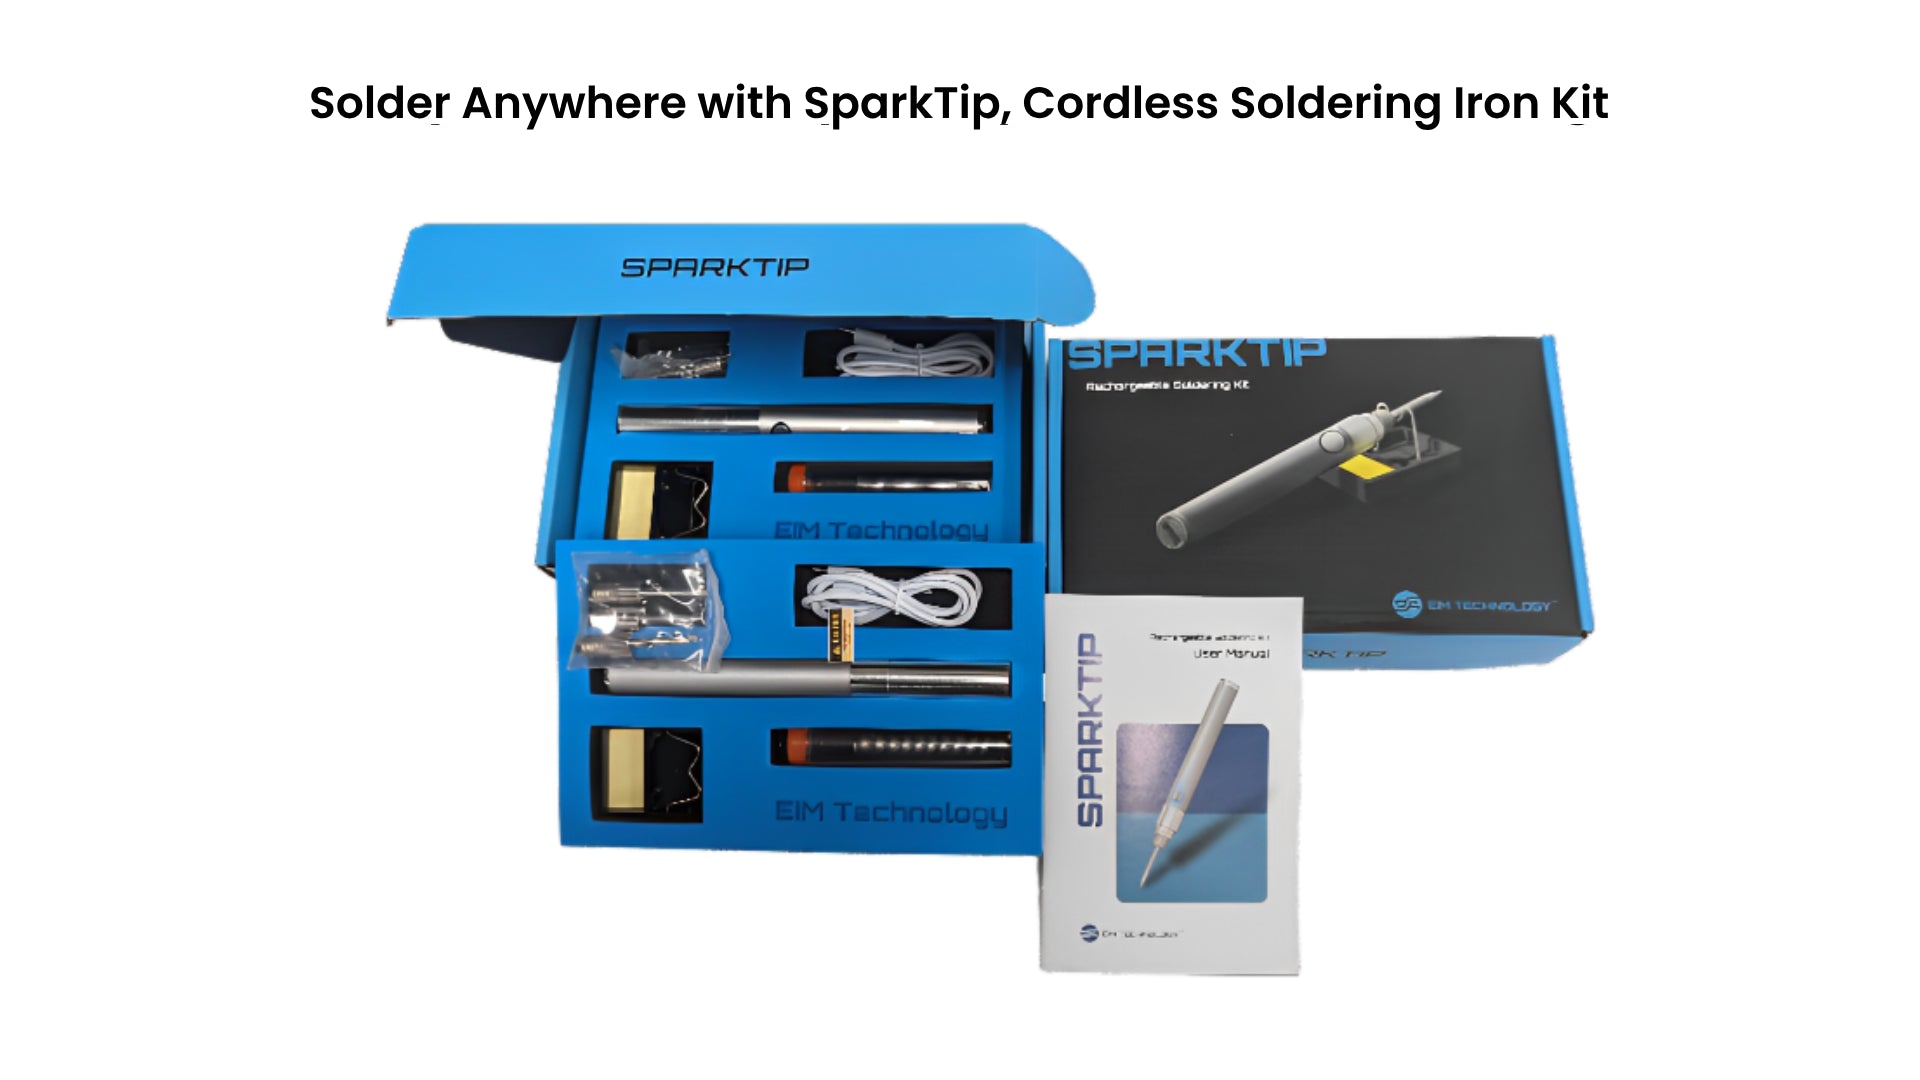 Solder Anywhere with SparkTip - Cordless Soldering Iron Kit